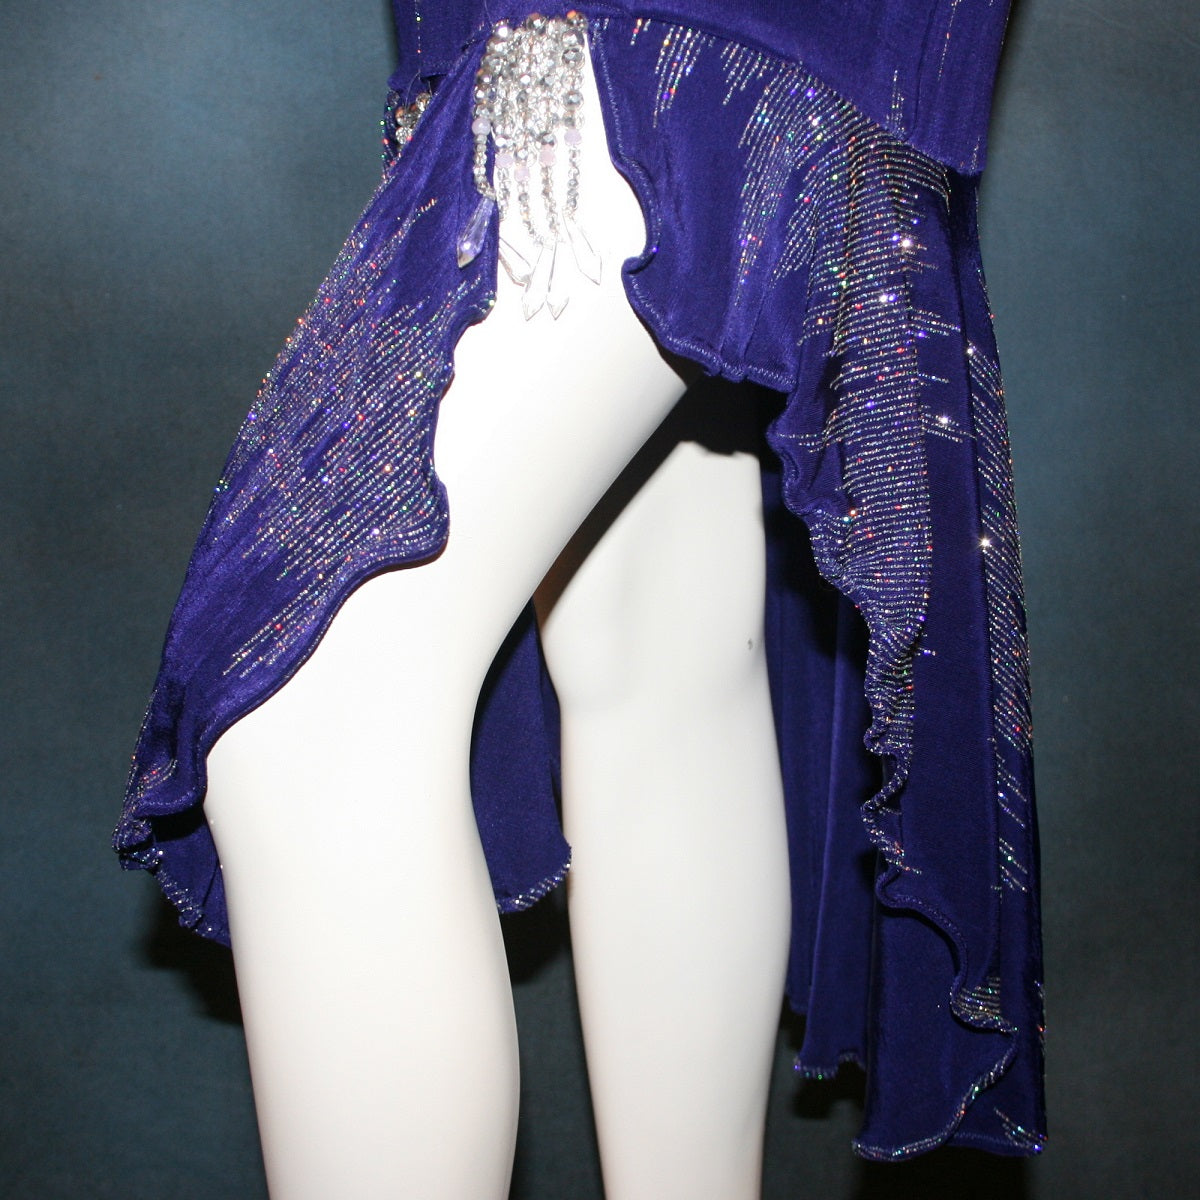 close up details of Deep royal purple Latin/rhythm/tango dress created in deep royal purple glitter slinky with an awesome electrifying glitter pattern features long flaired sleeves, lattice strap detailing up the low back & a touch of hand beading in skirting slits.